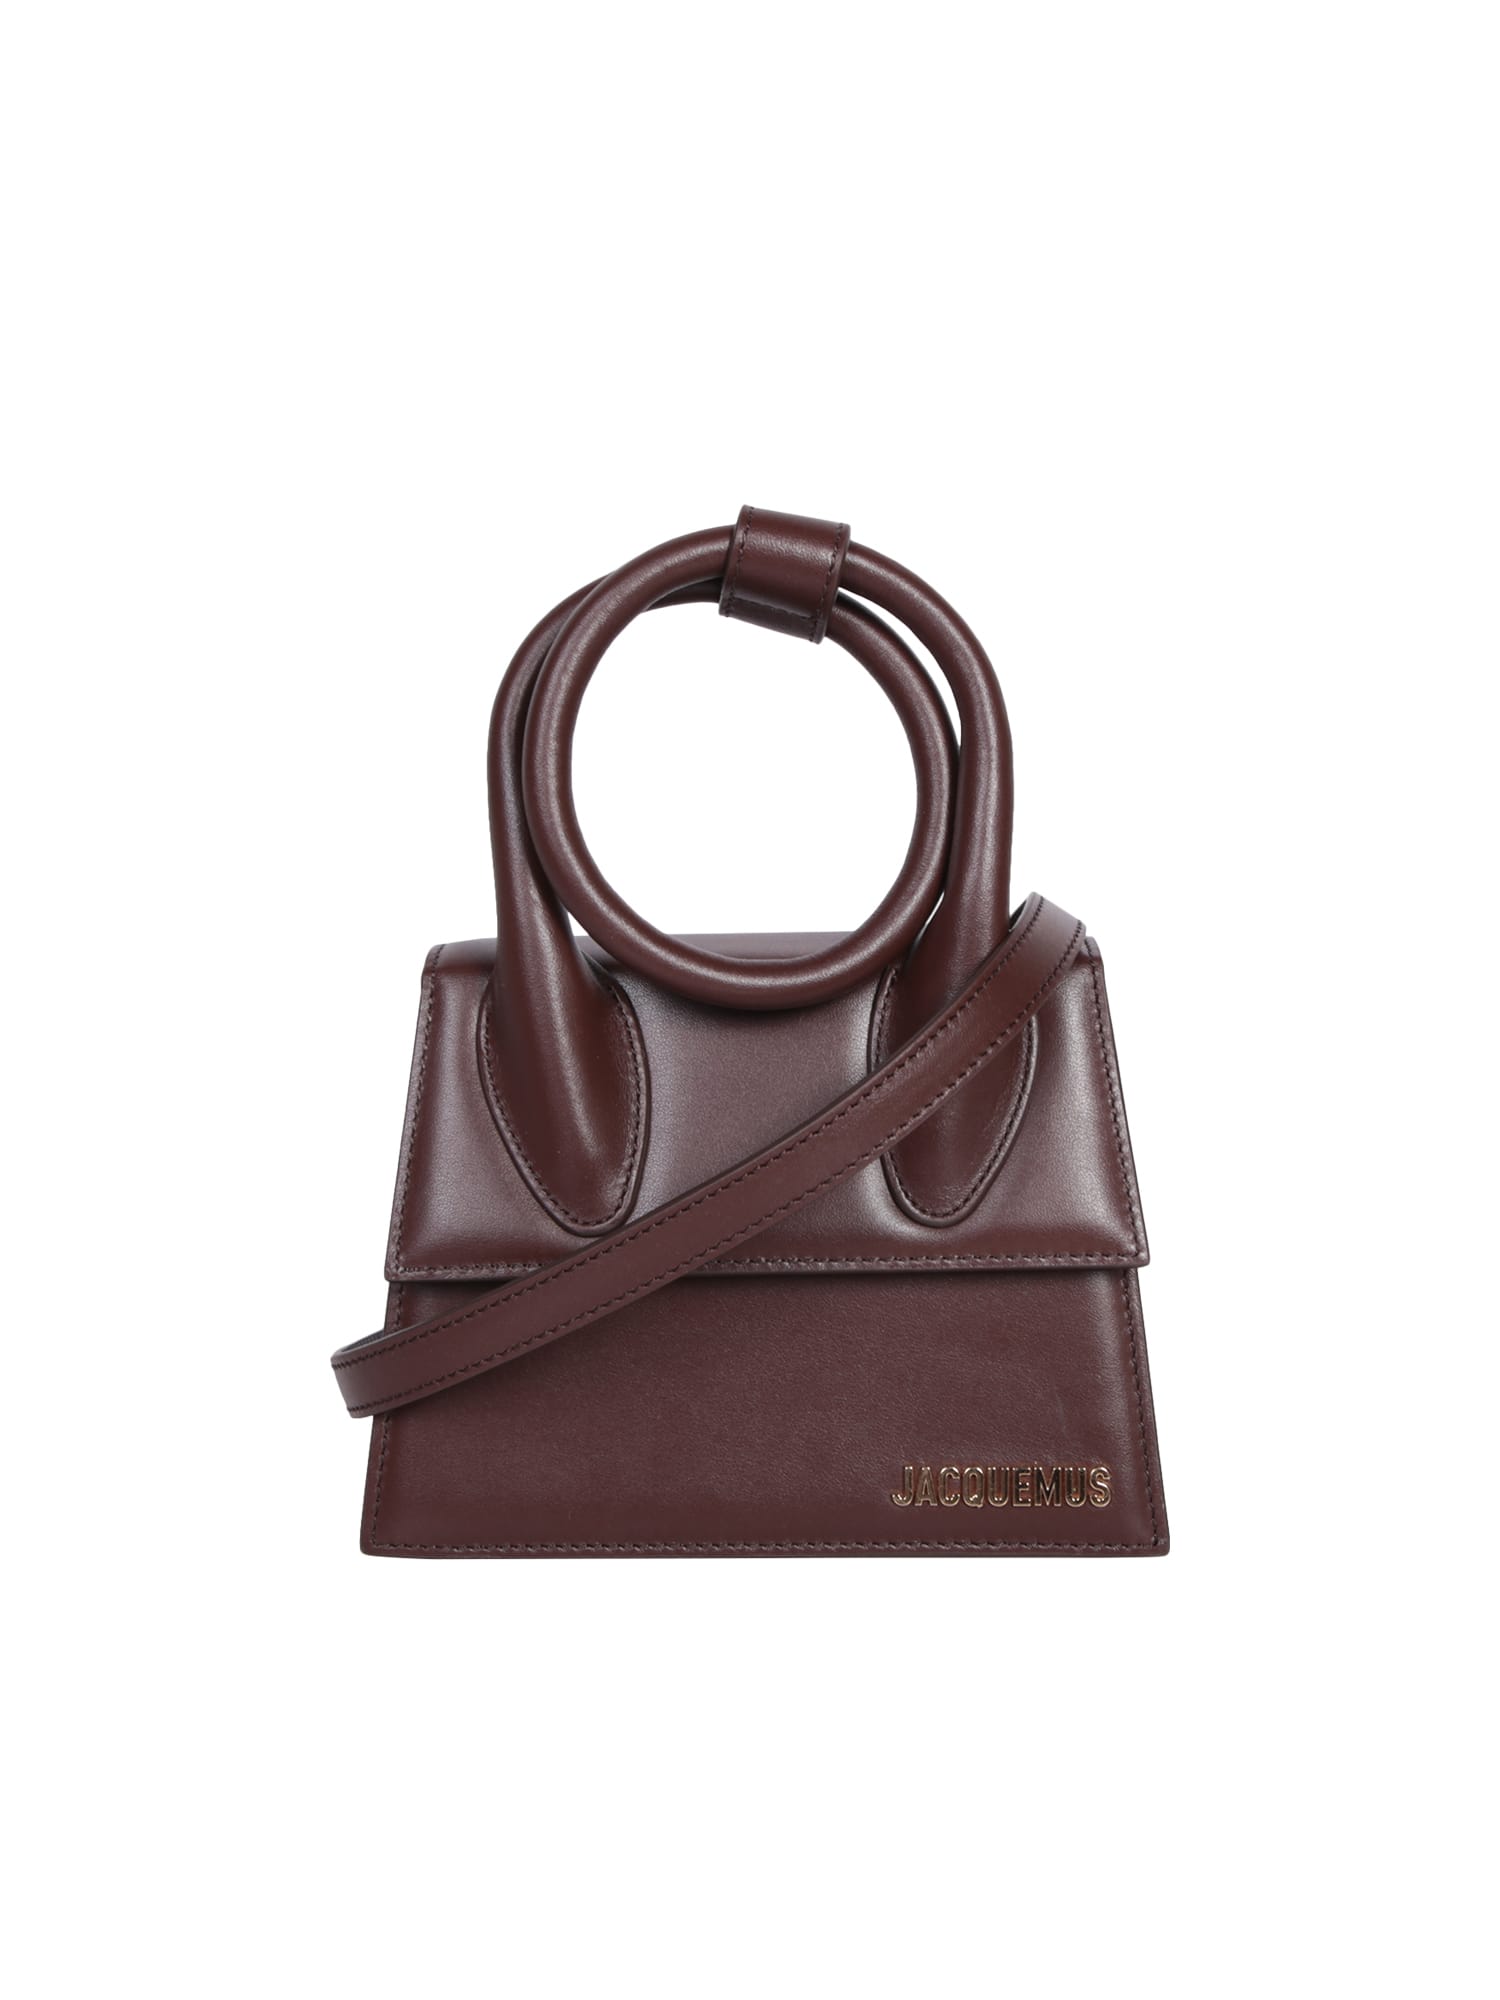 JACQUEMUS LE CHIQUITO NOEUD BROWN BAG